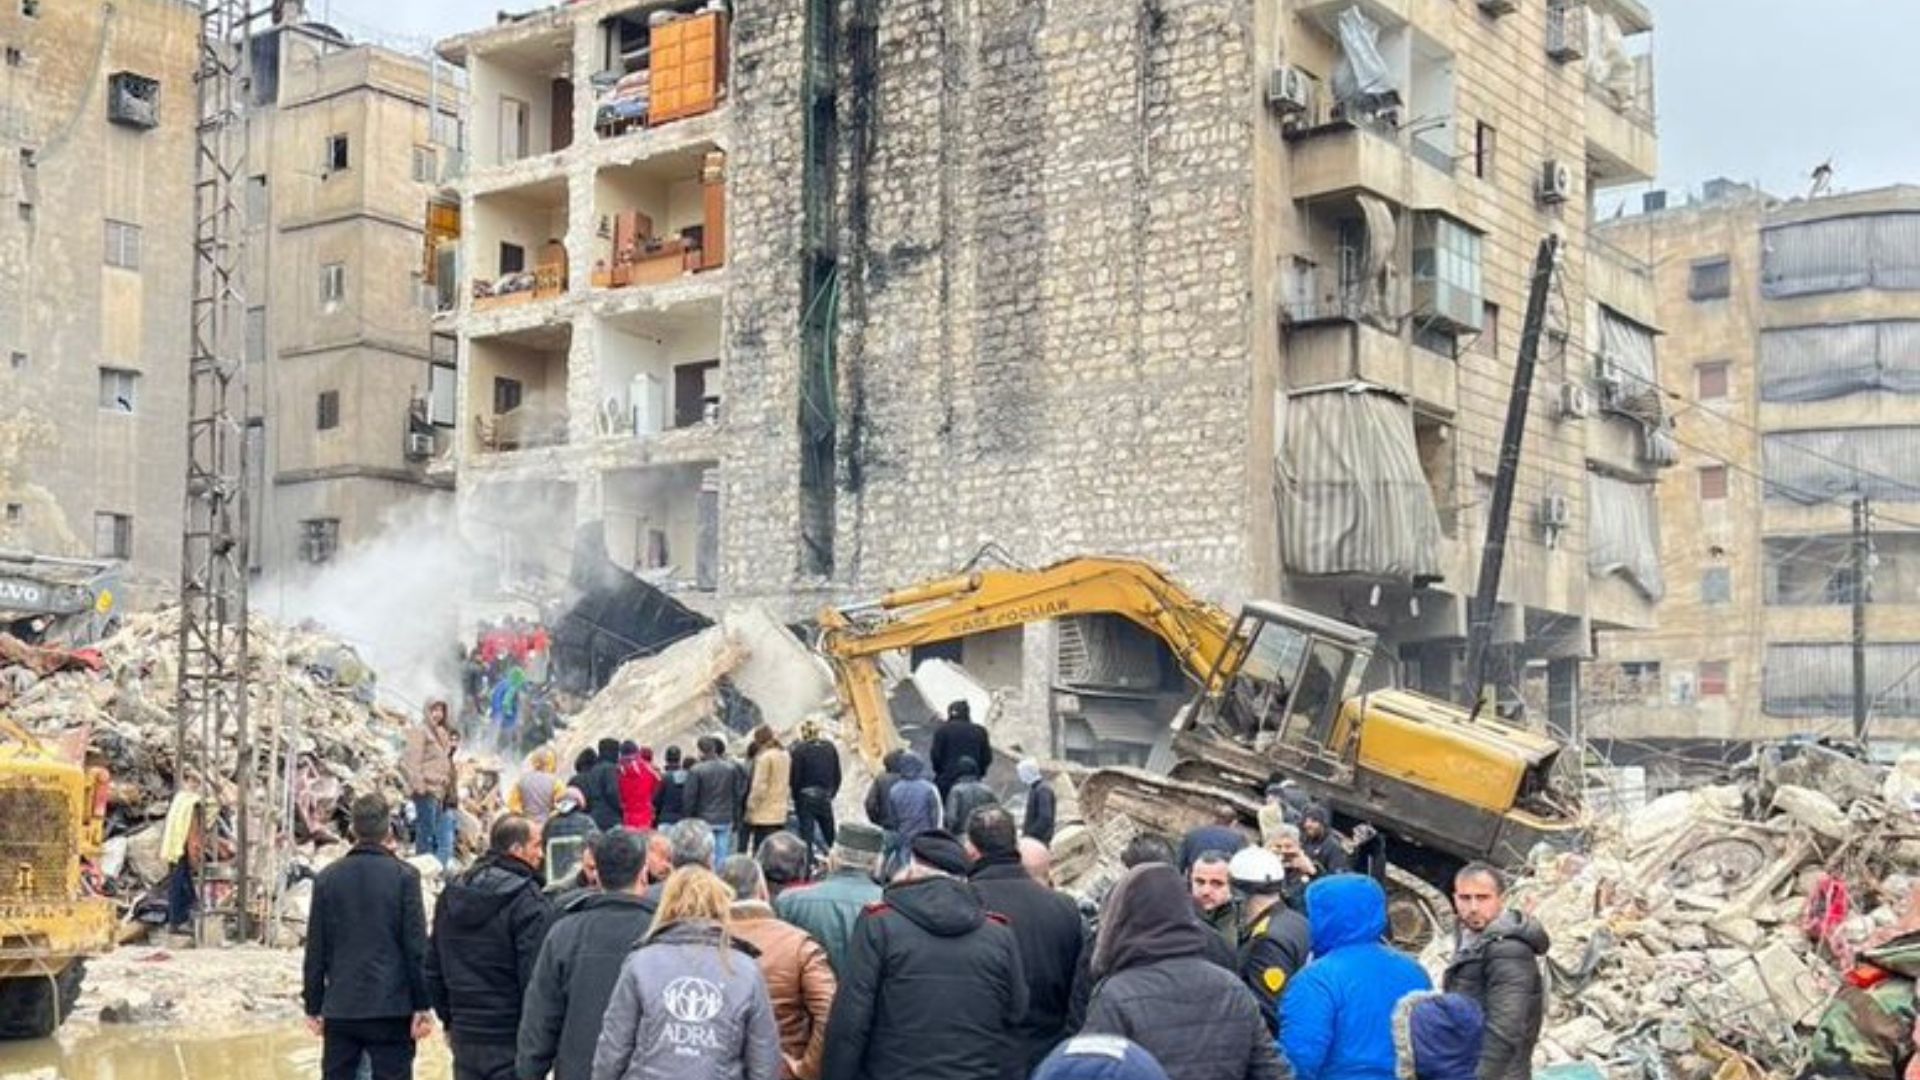 Buildings collapse after the wake of an earthquake in Turkiye and Syria. Aid workers are assisting in the cleanup